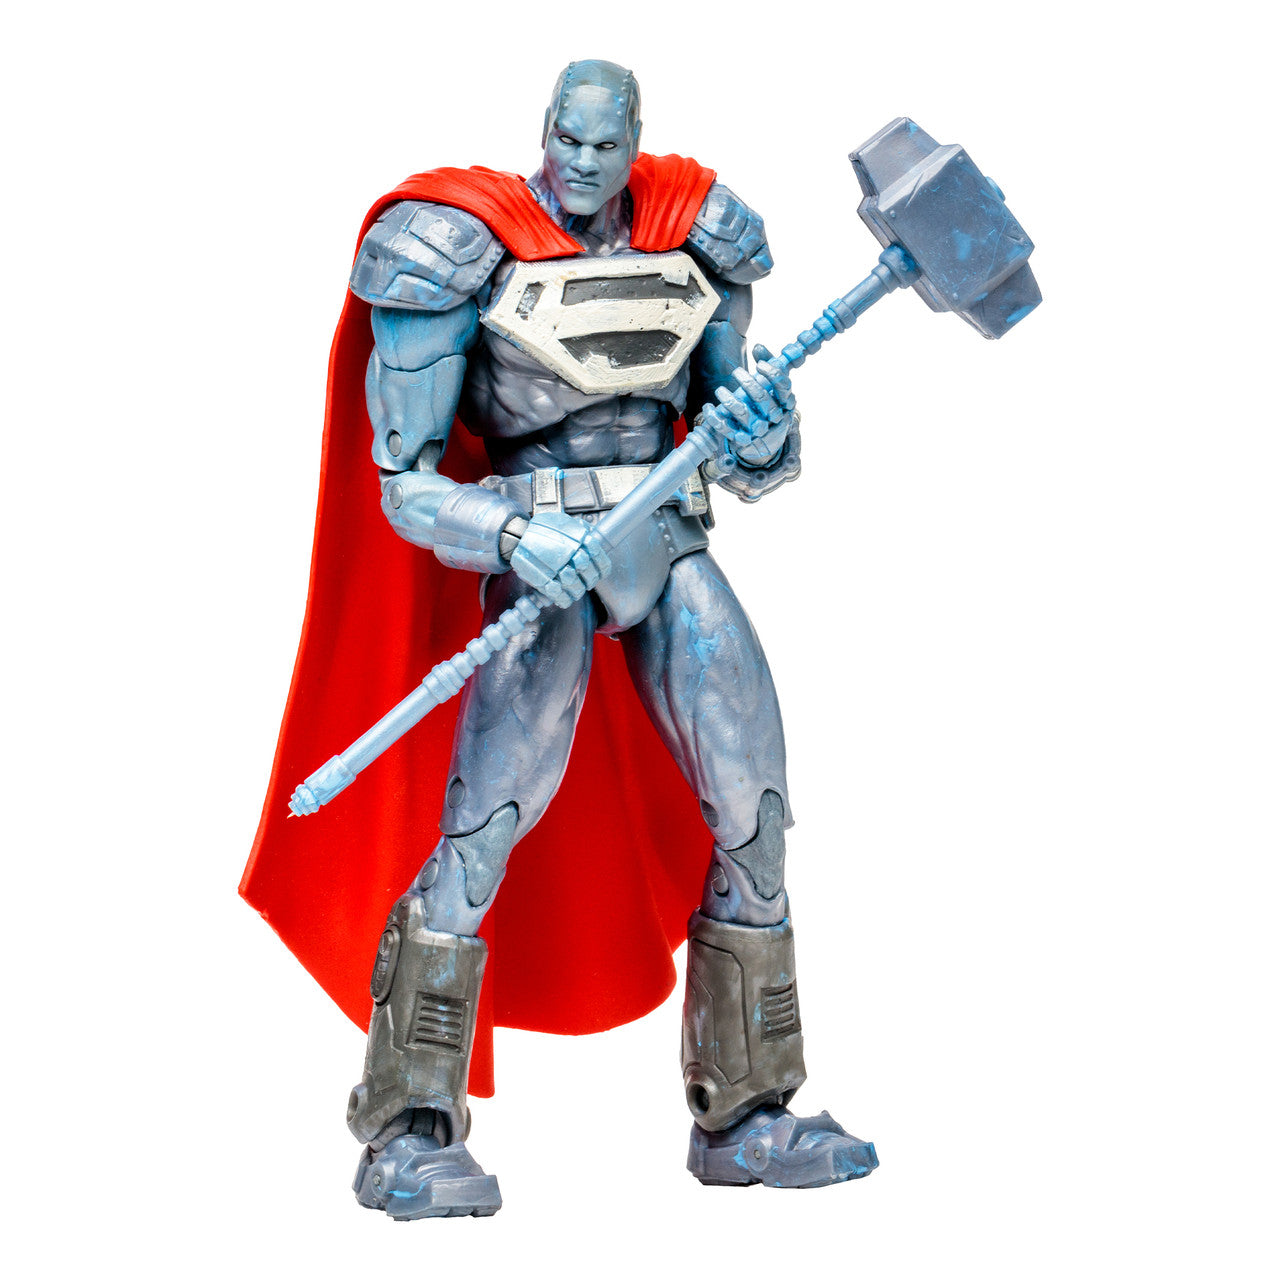 Steel (Reign of the Supermen) Figure by McFarlane